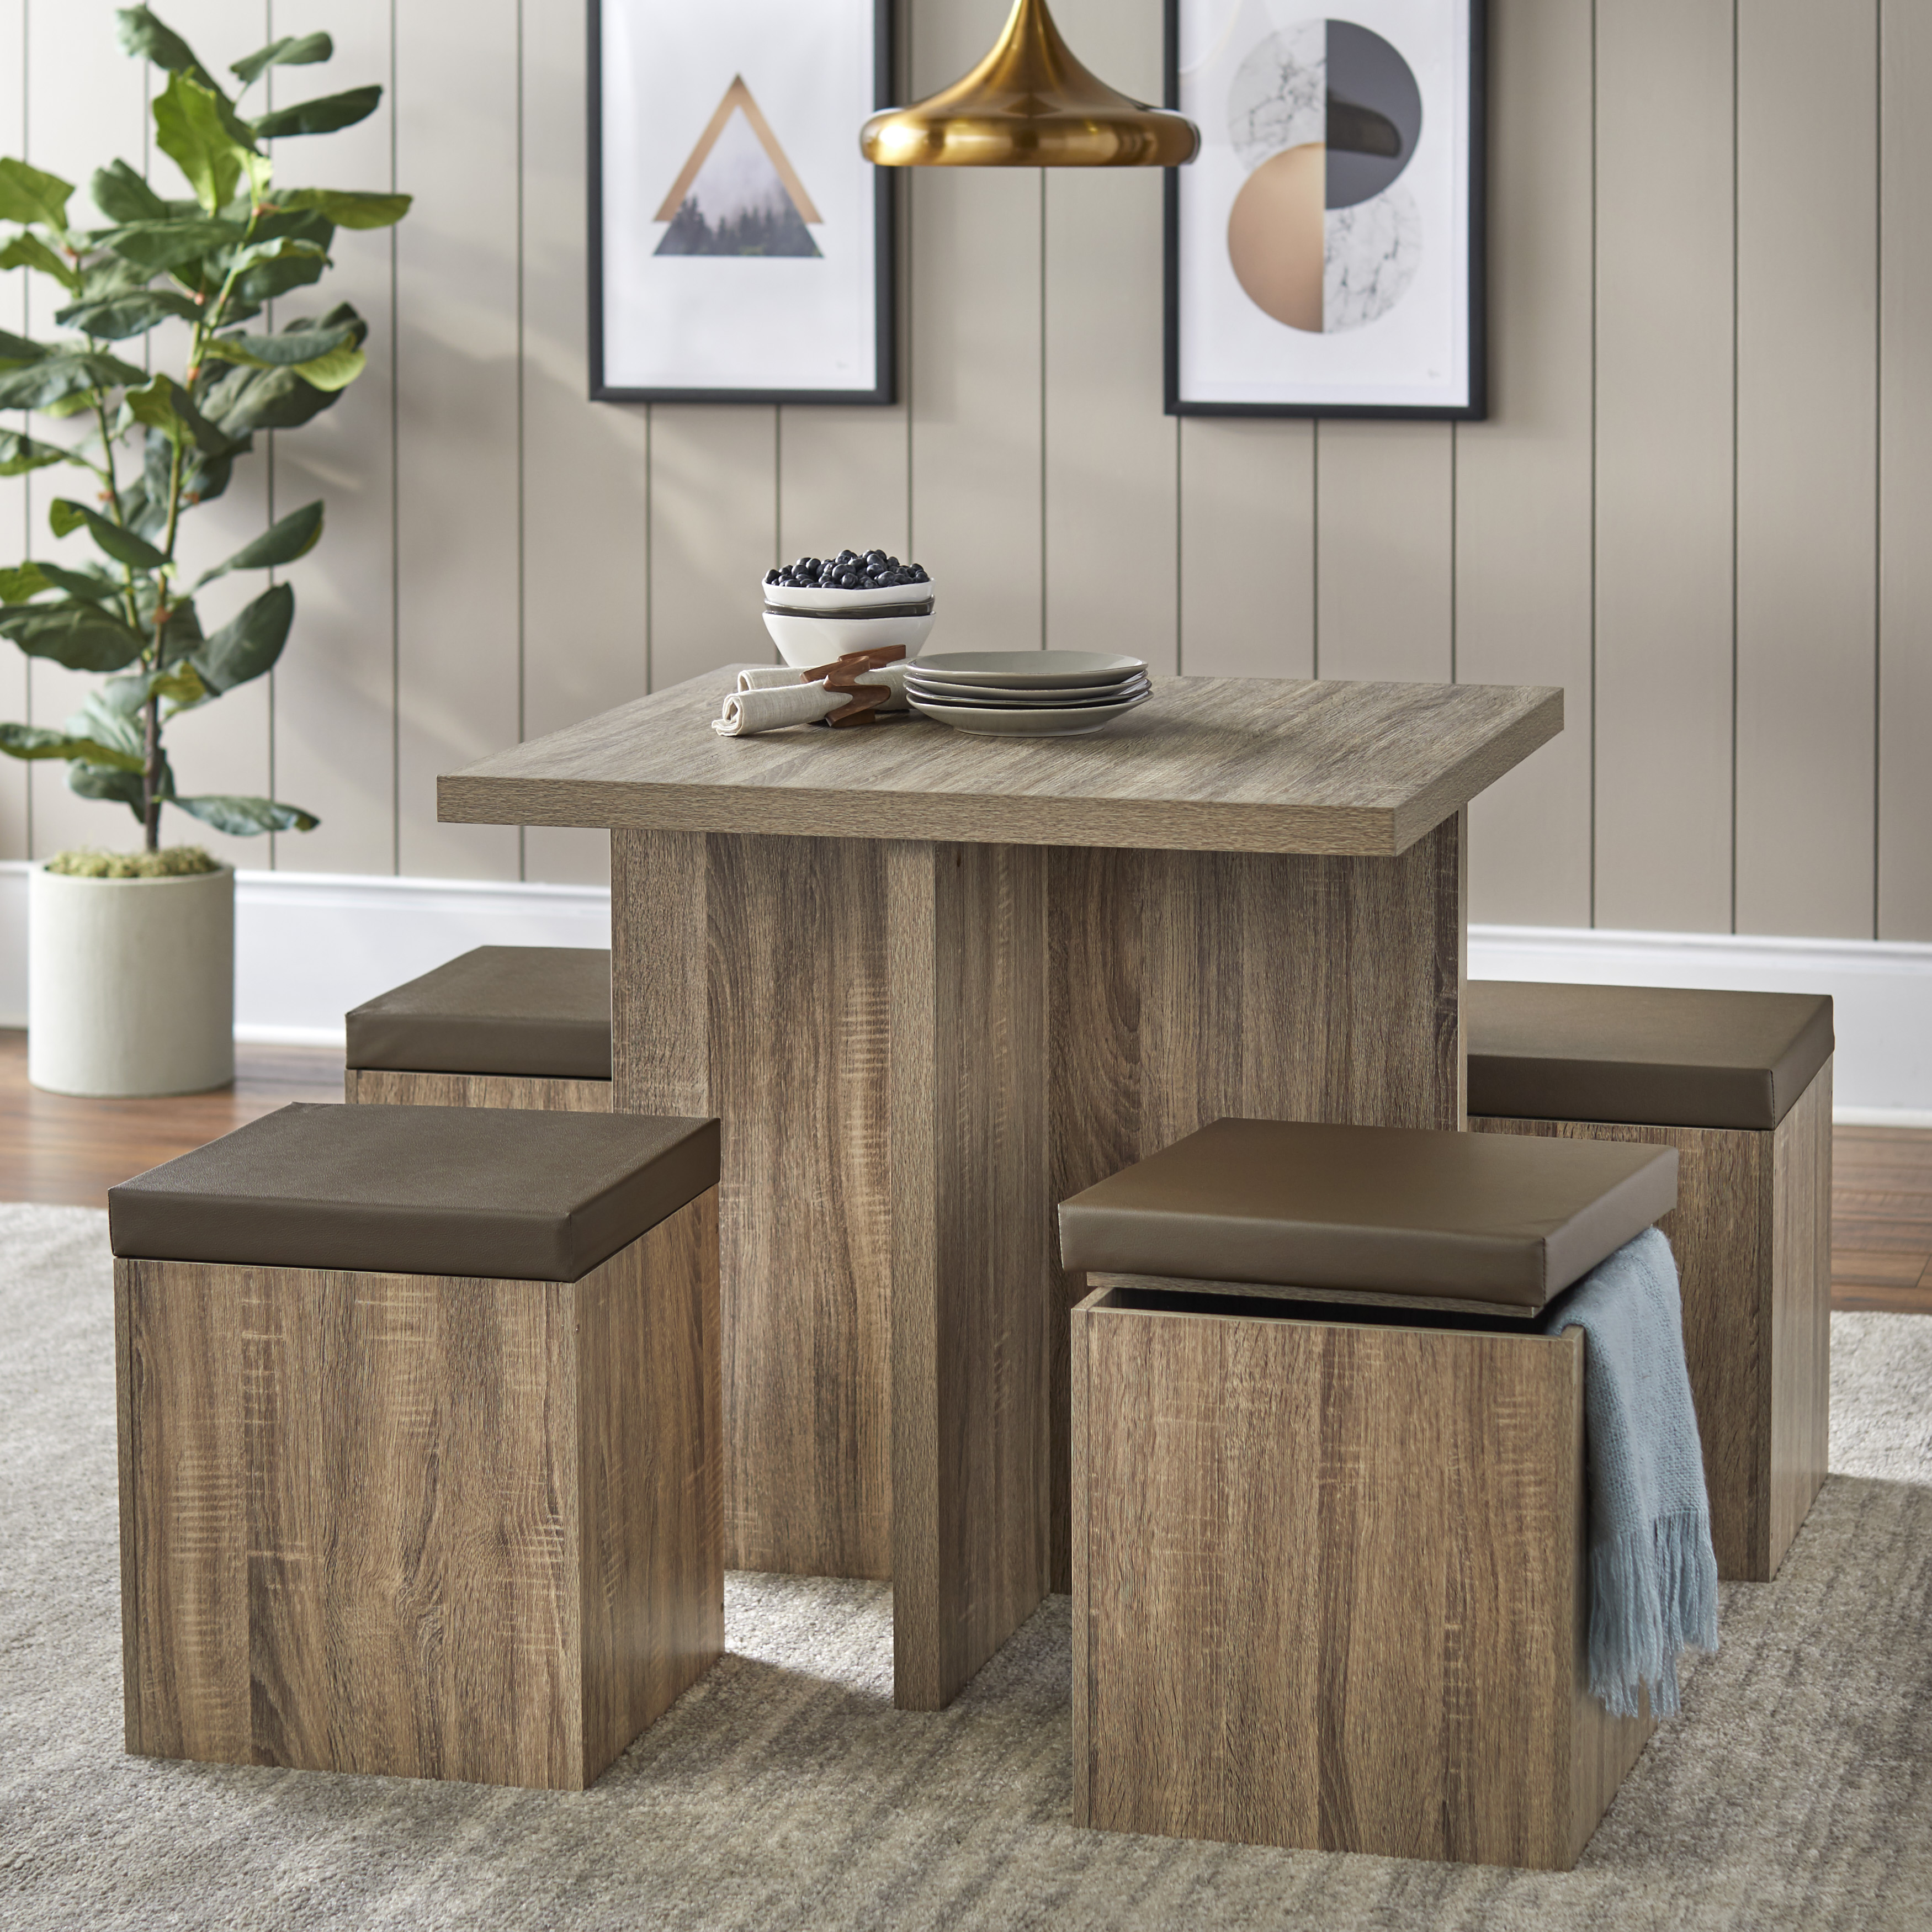 Mainstays 5-Piece Dexter Dining Room/Kitchen Set with Storage Ottoman, Multiple Colors - image 3 of 8